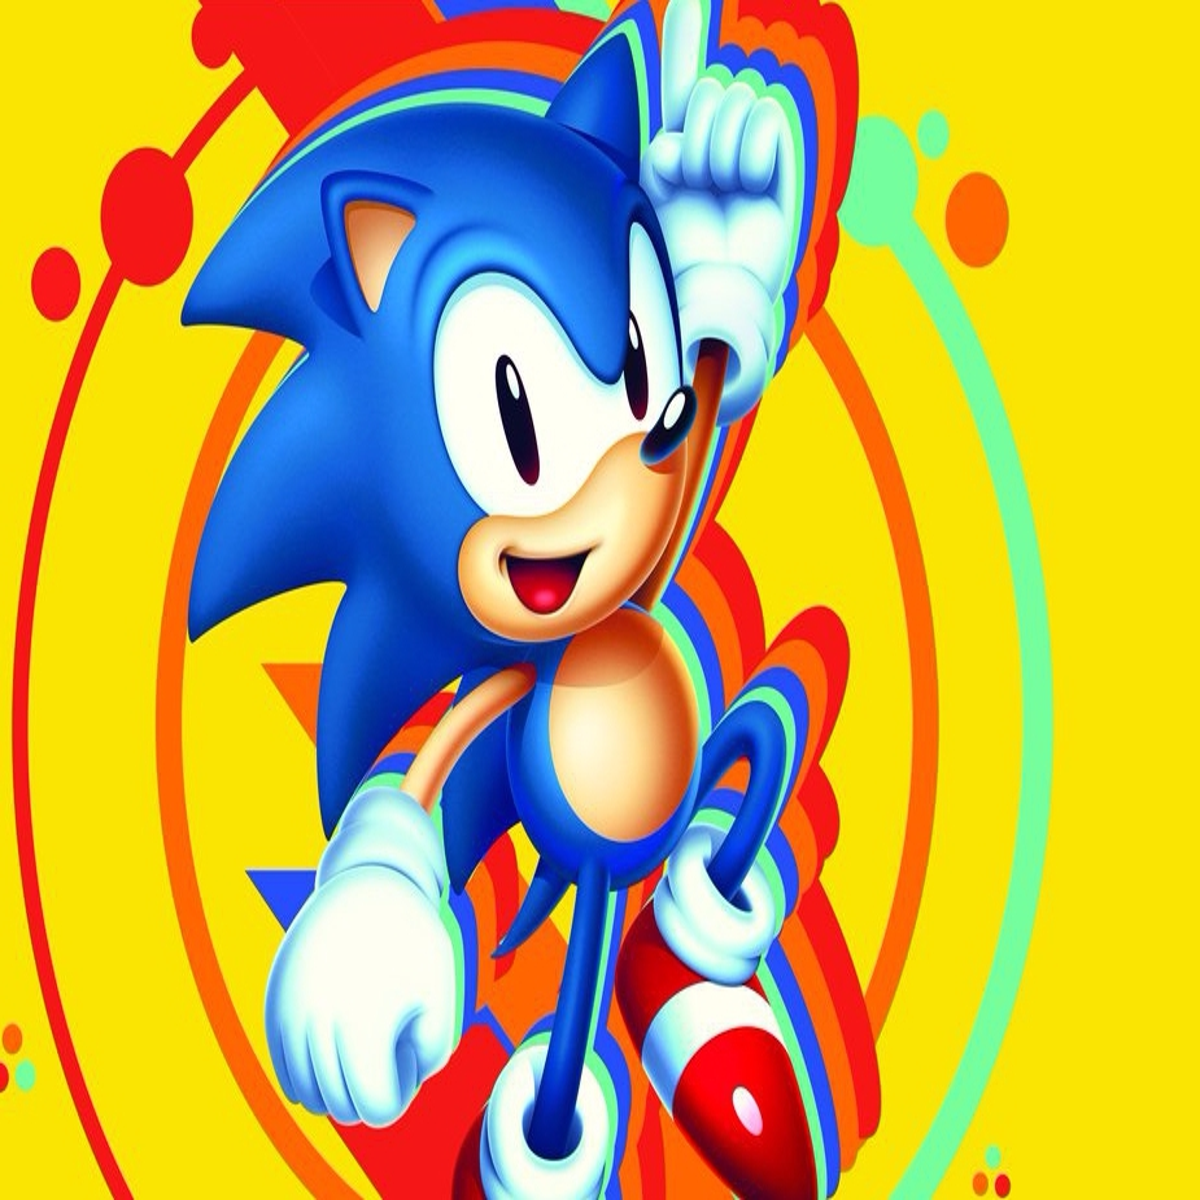 The world's worst Sonic The Hedgehog game is available again on